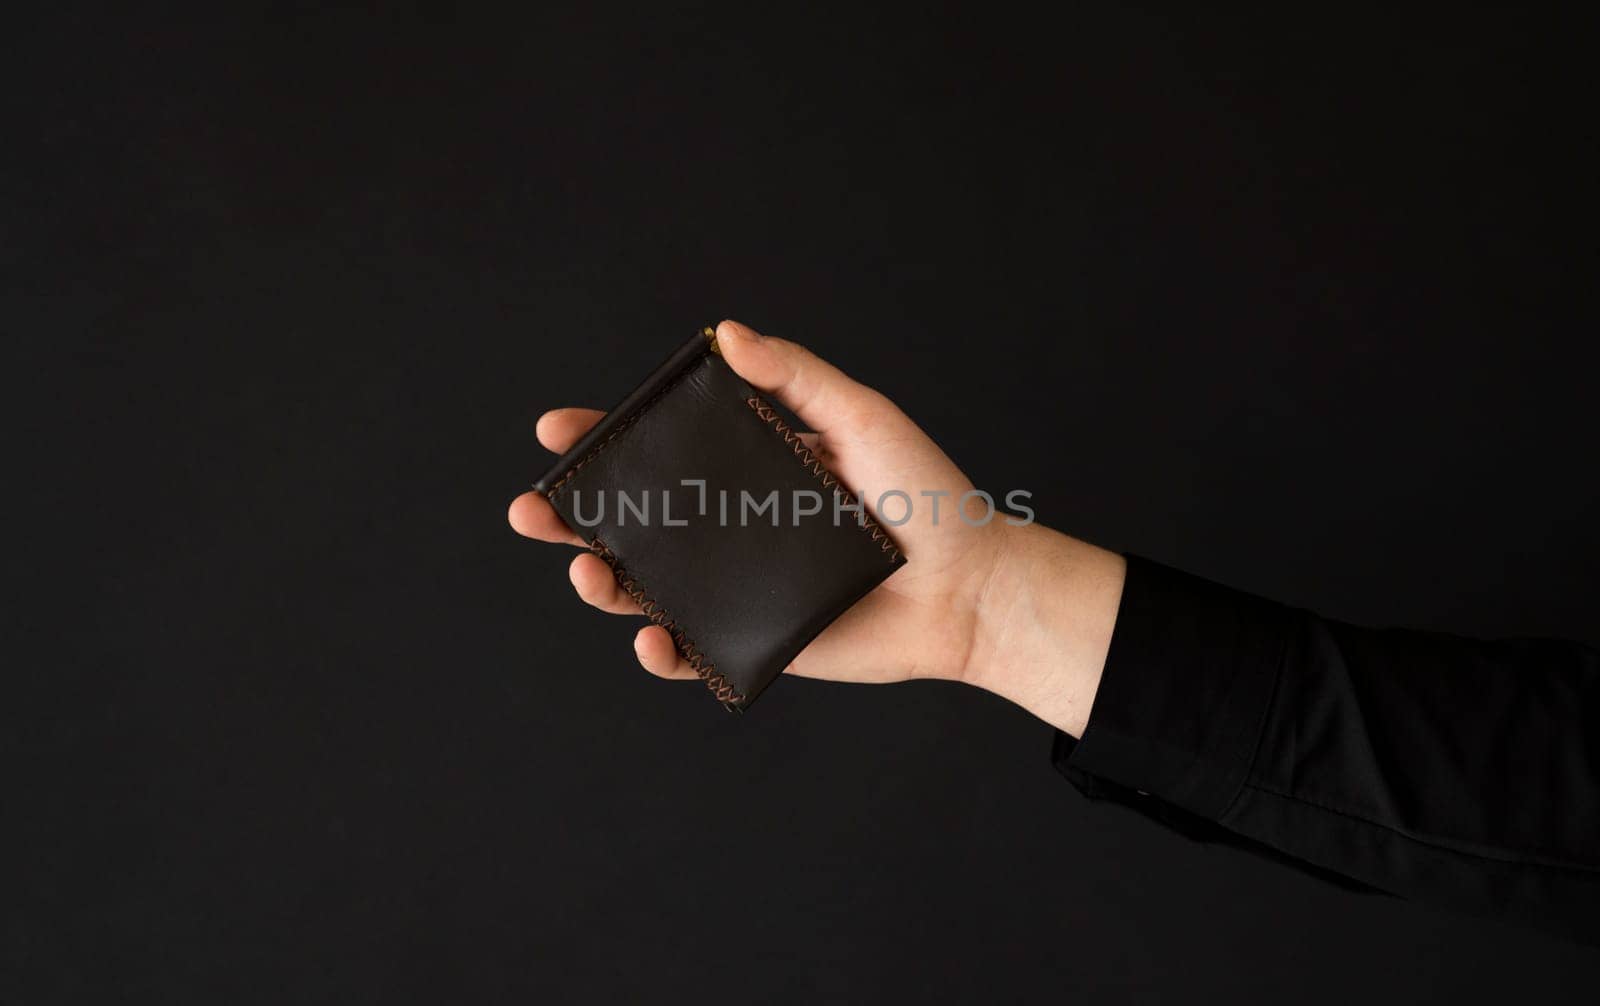 Brown empty men's business handmade leather card holder in a man's hand